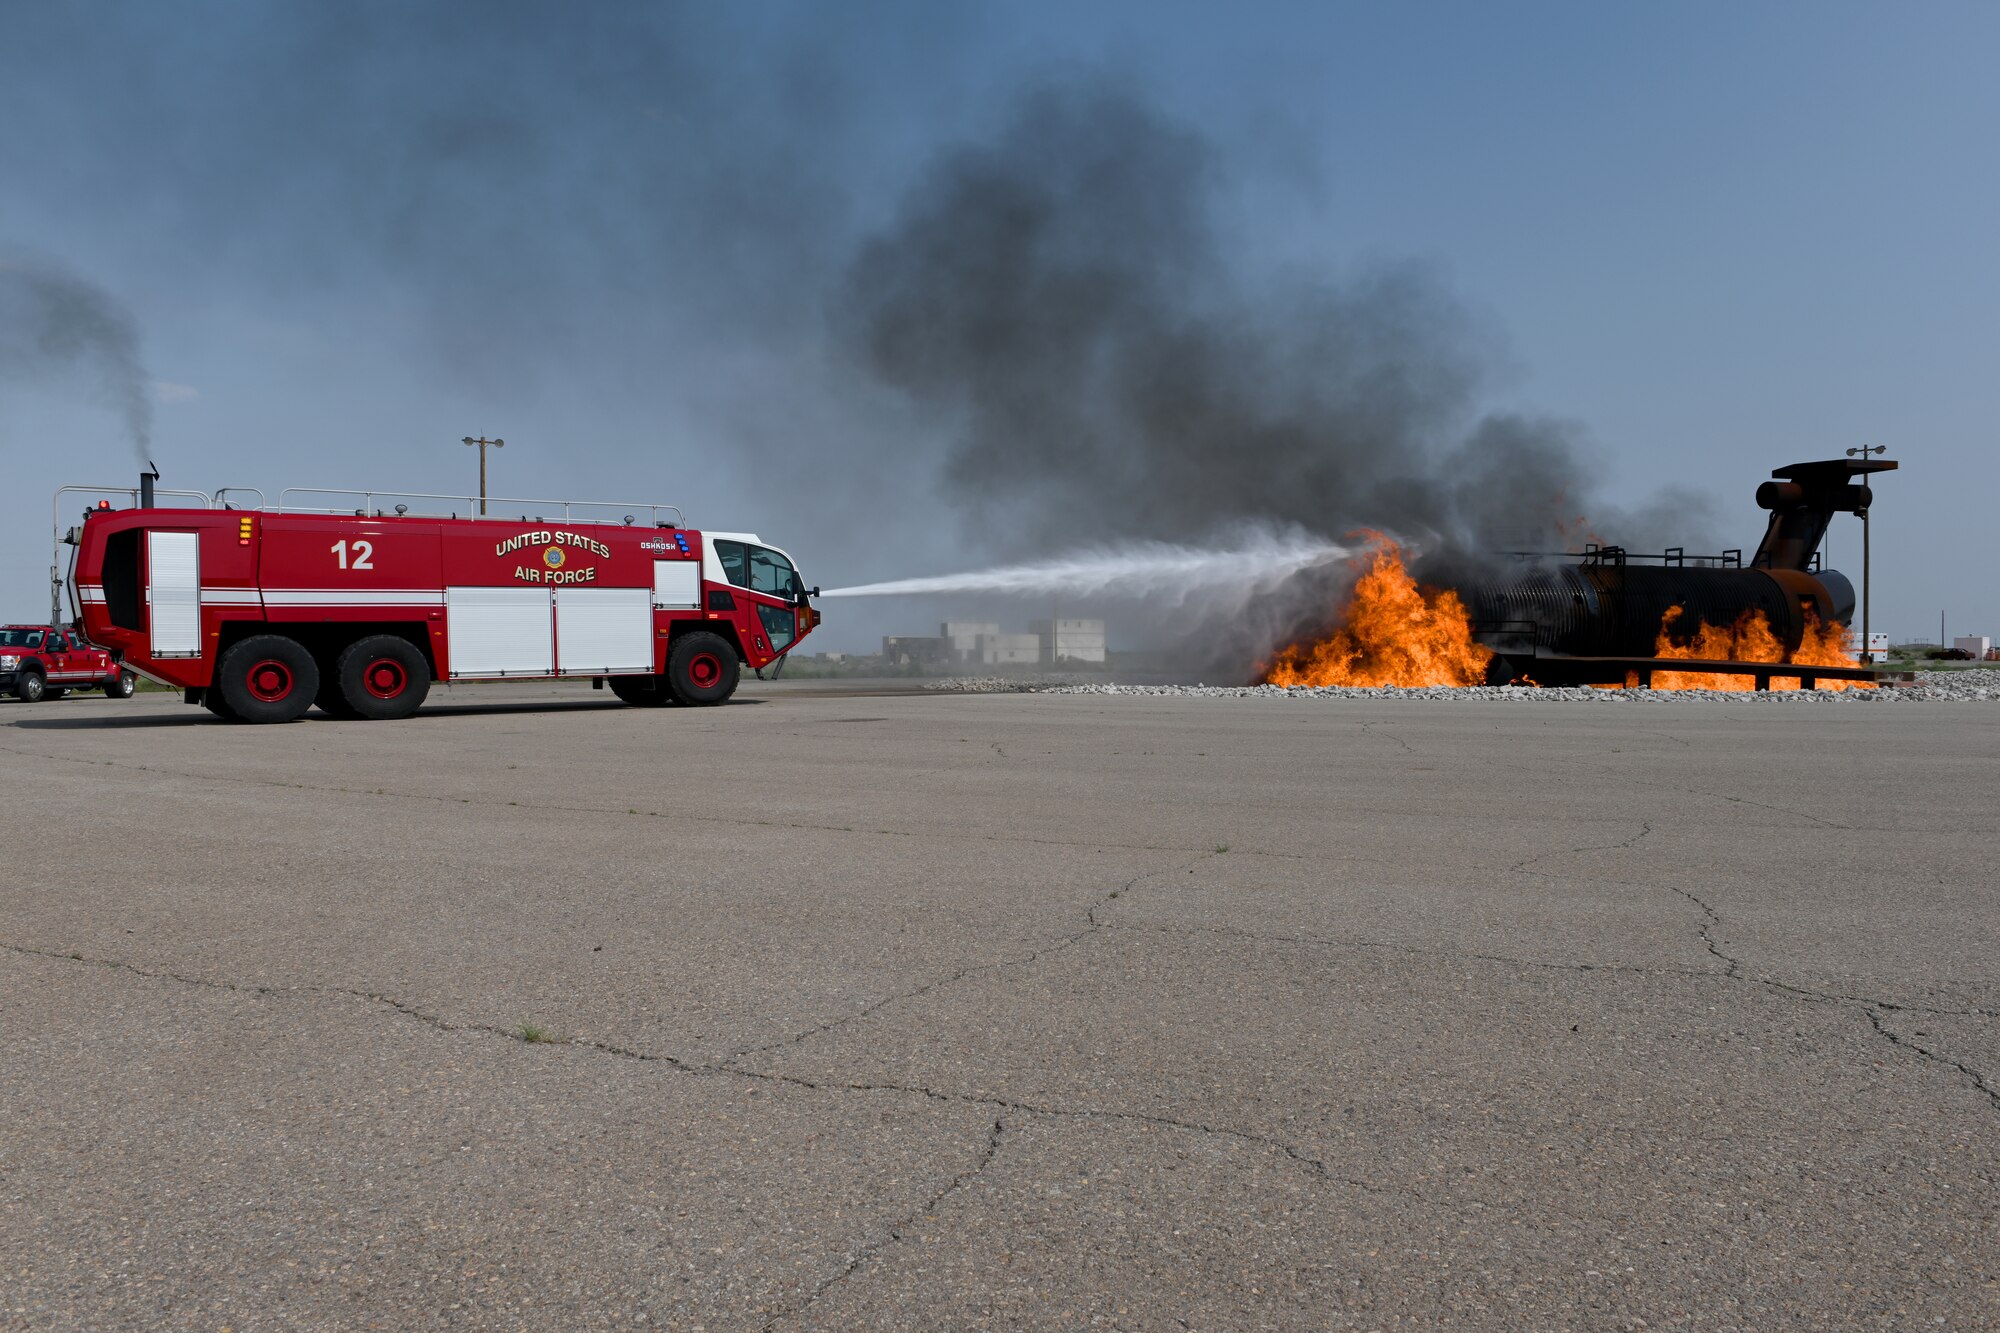 Chief Master Sgt. Kristina Rogers, 19th Air Force command chief, extinguishes a simulated aircraft fire, July 21, 2021, on Holloman Air Force Base, N.M. During the visit, the command team visited locations including the 16th Training Squadron, Holloman Airman Leadership School and the 49th Civil Engineer Squadron. (U.S. Air Force photo by Staff Sgt. Christopher S. Sparks)